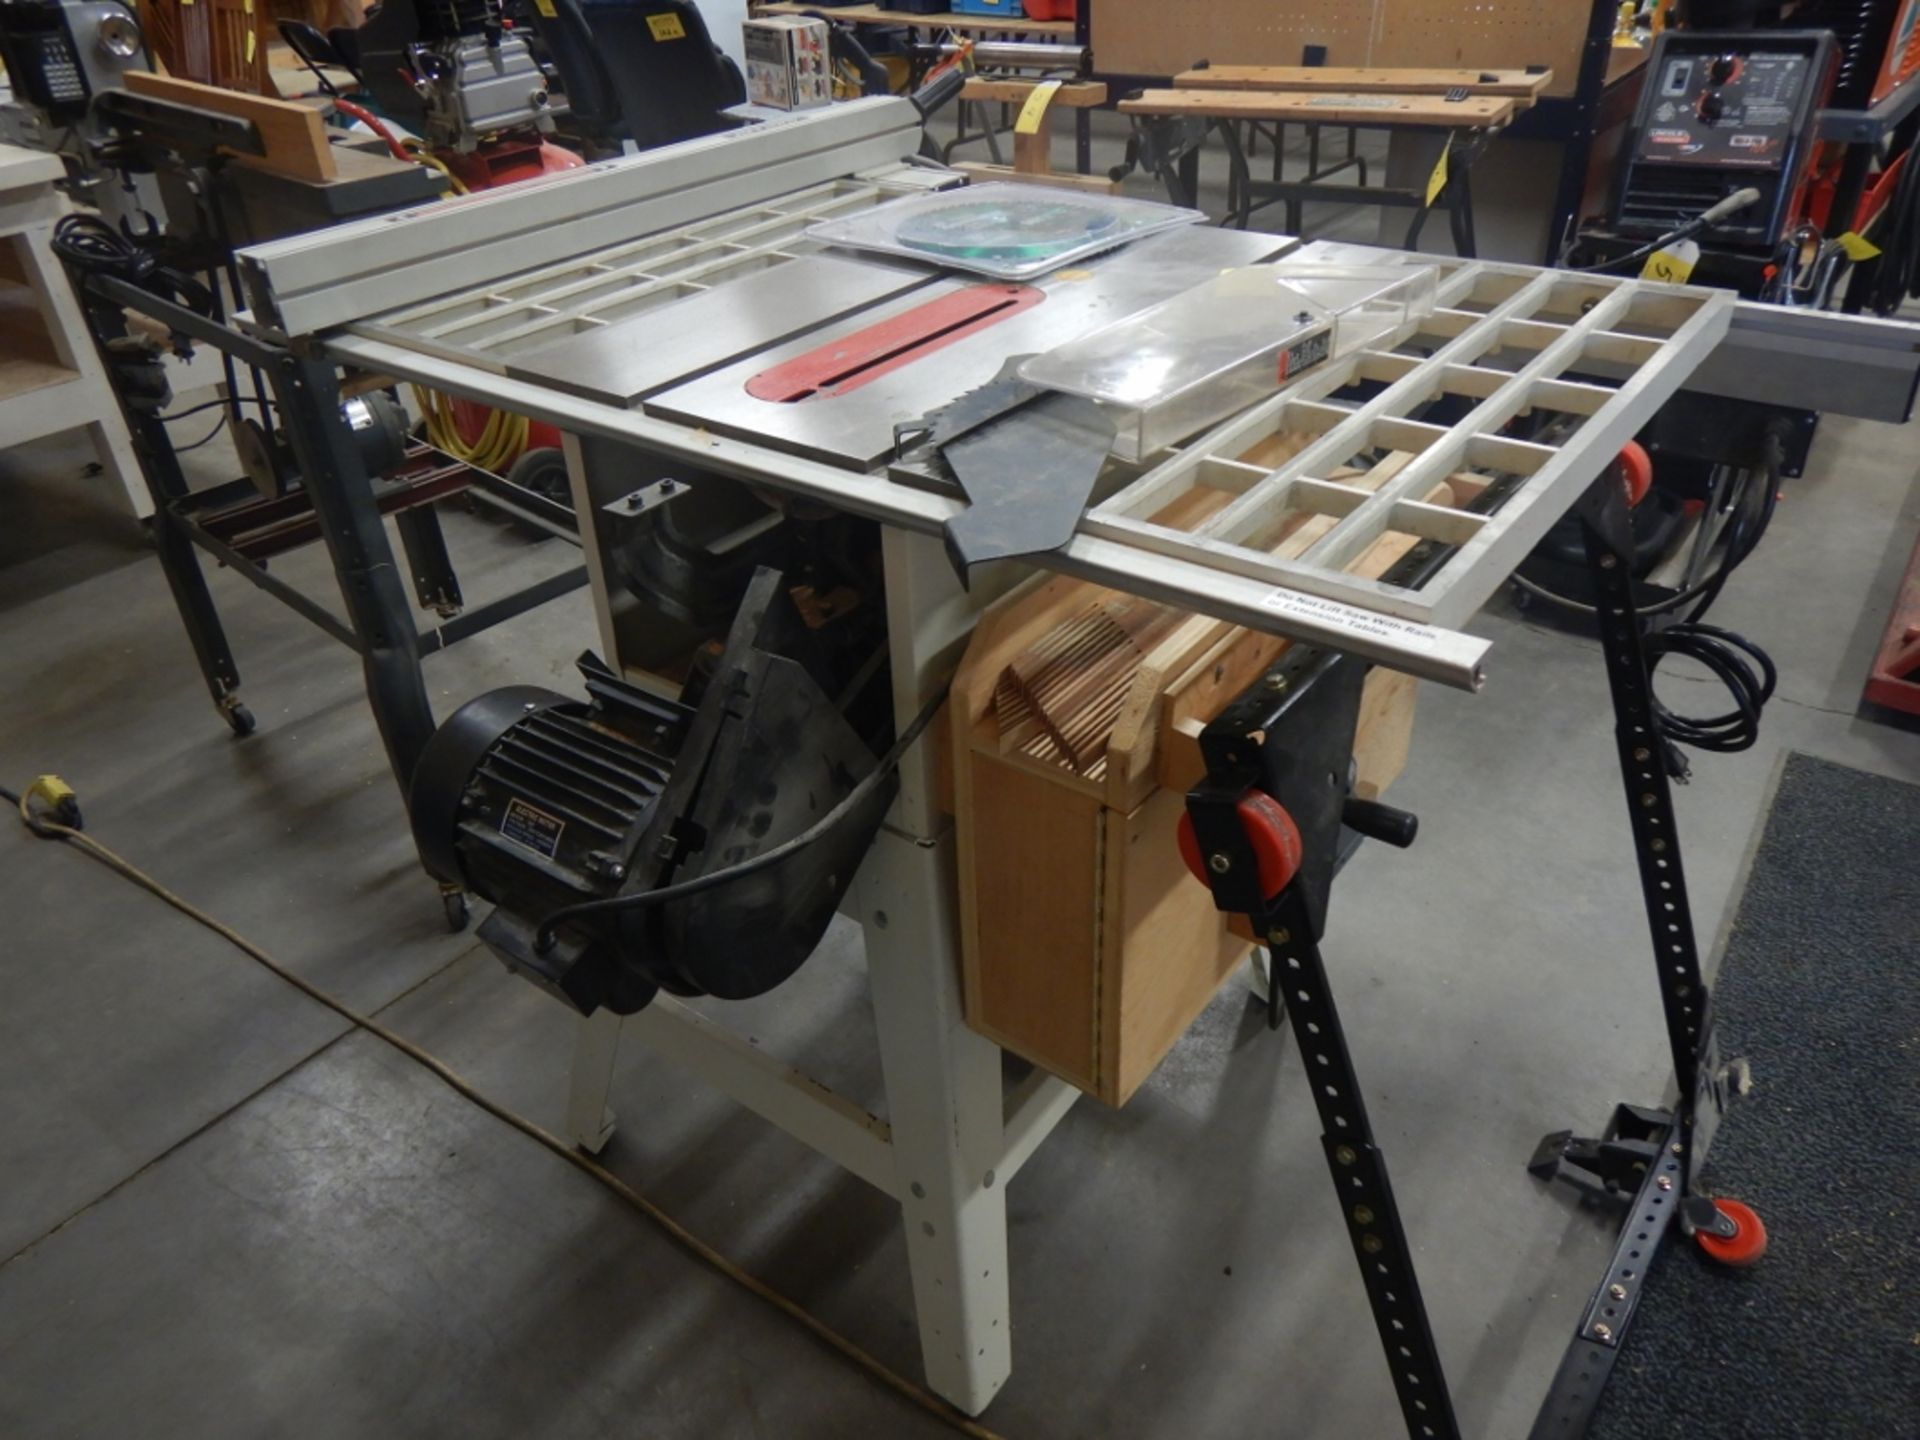 10IN TABLE SAW W/ ALIGN-A-RIP ADJUSTABLE FENCE, 3HP MOTOR - Image 5 of 7